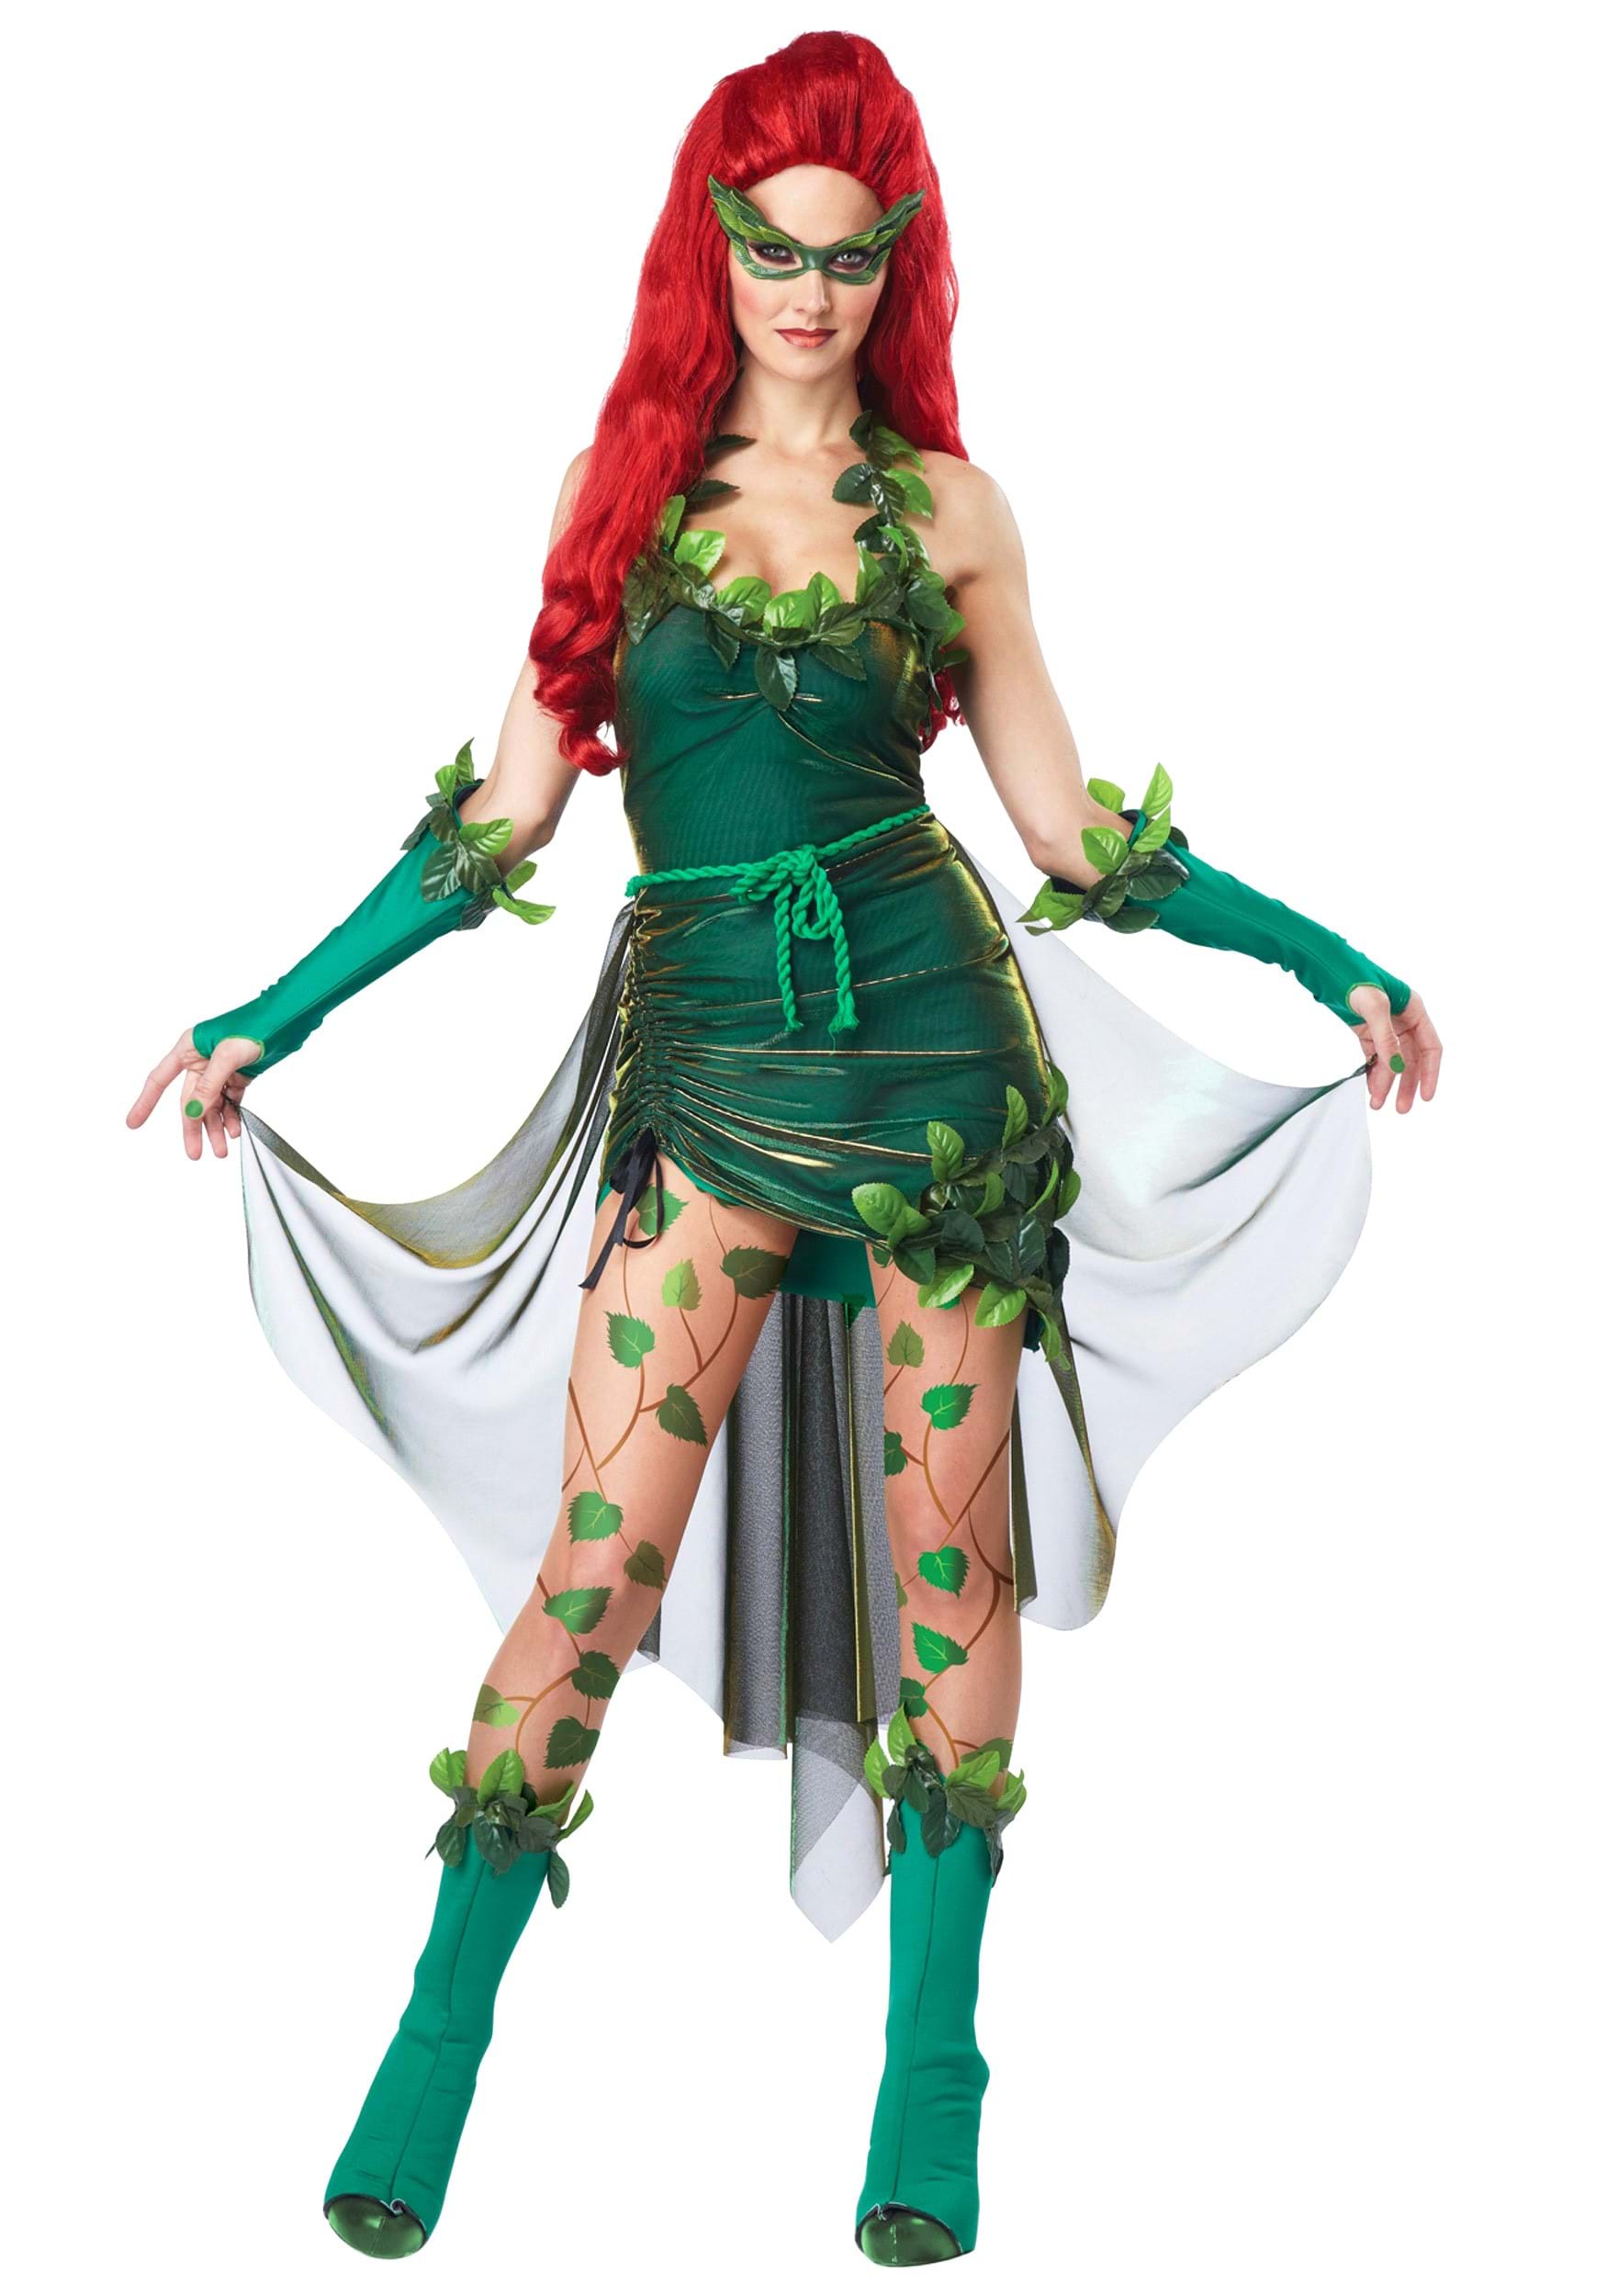 Photos - Fancy Dress California Costume Collection Lethal Beauty Costume for Women Green CA0128 